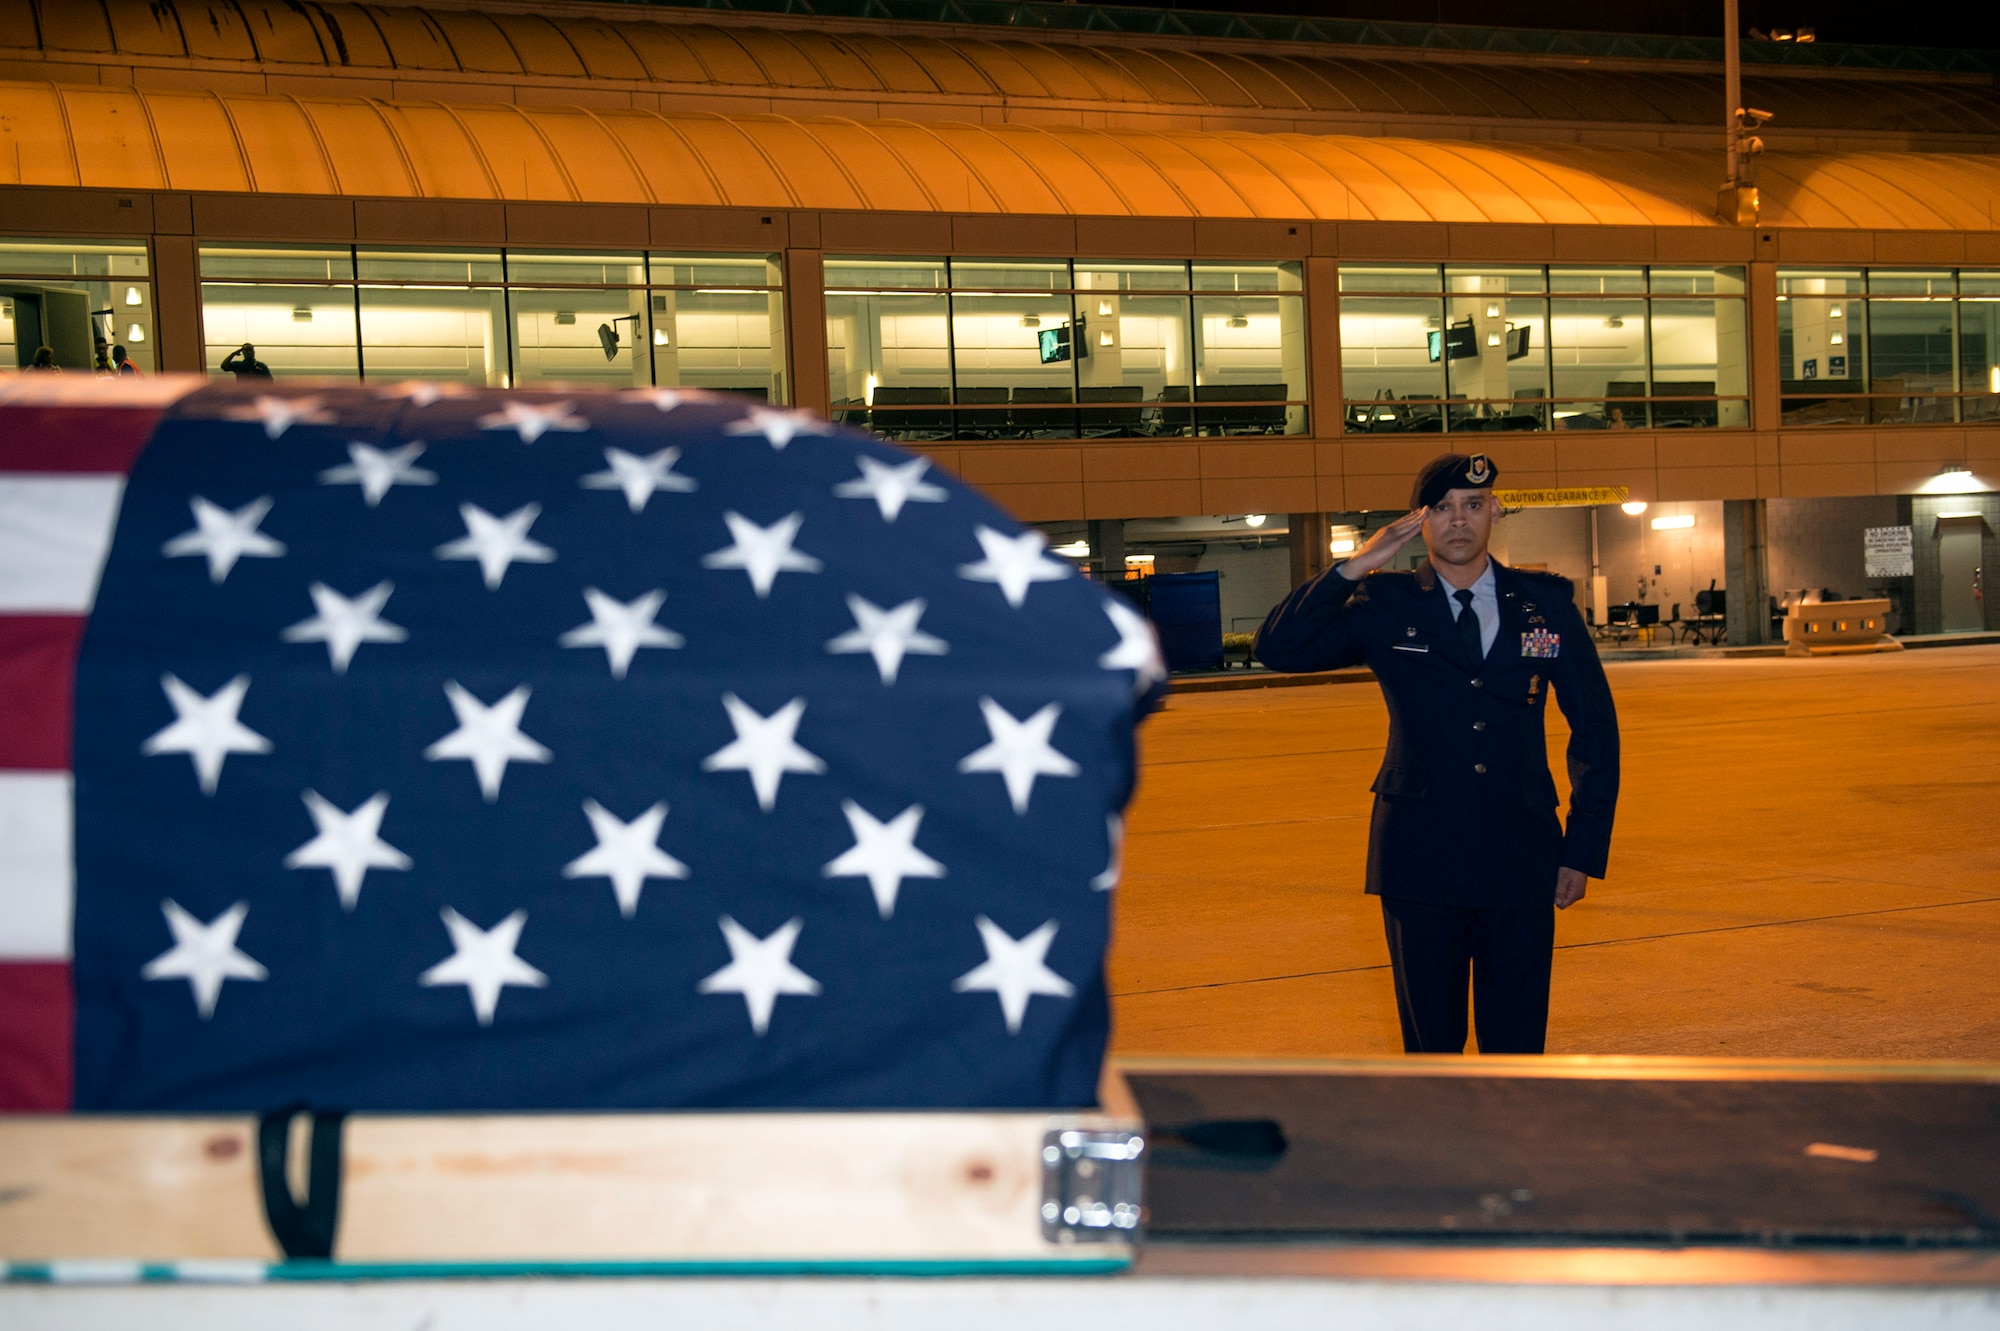 Lt. Col. José Antonio Lebrón, Joint Task Force-Bravo joint security forces commander, Soto Cano Air Base, Honduras, salutes his nephew’s, Senior Airman Gabriel Antonio Fuentes Lebrón, 18th Security Forces Squadron, Kadena Air Base, Japan, casket during a dignified arrival in Jacksonville, Fla., May 30, 2017. A dignified arrival is the process by which, upon the return from the theater of operations to the United States, the remains of fallen military members are transferred from an aircraft to a waiting vehicle and then to the port mortuary. Lebrón passed away in Okinawa, May 19. (U.S. Air Force photo by Senior Airman Greg Nash)